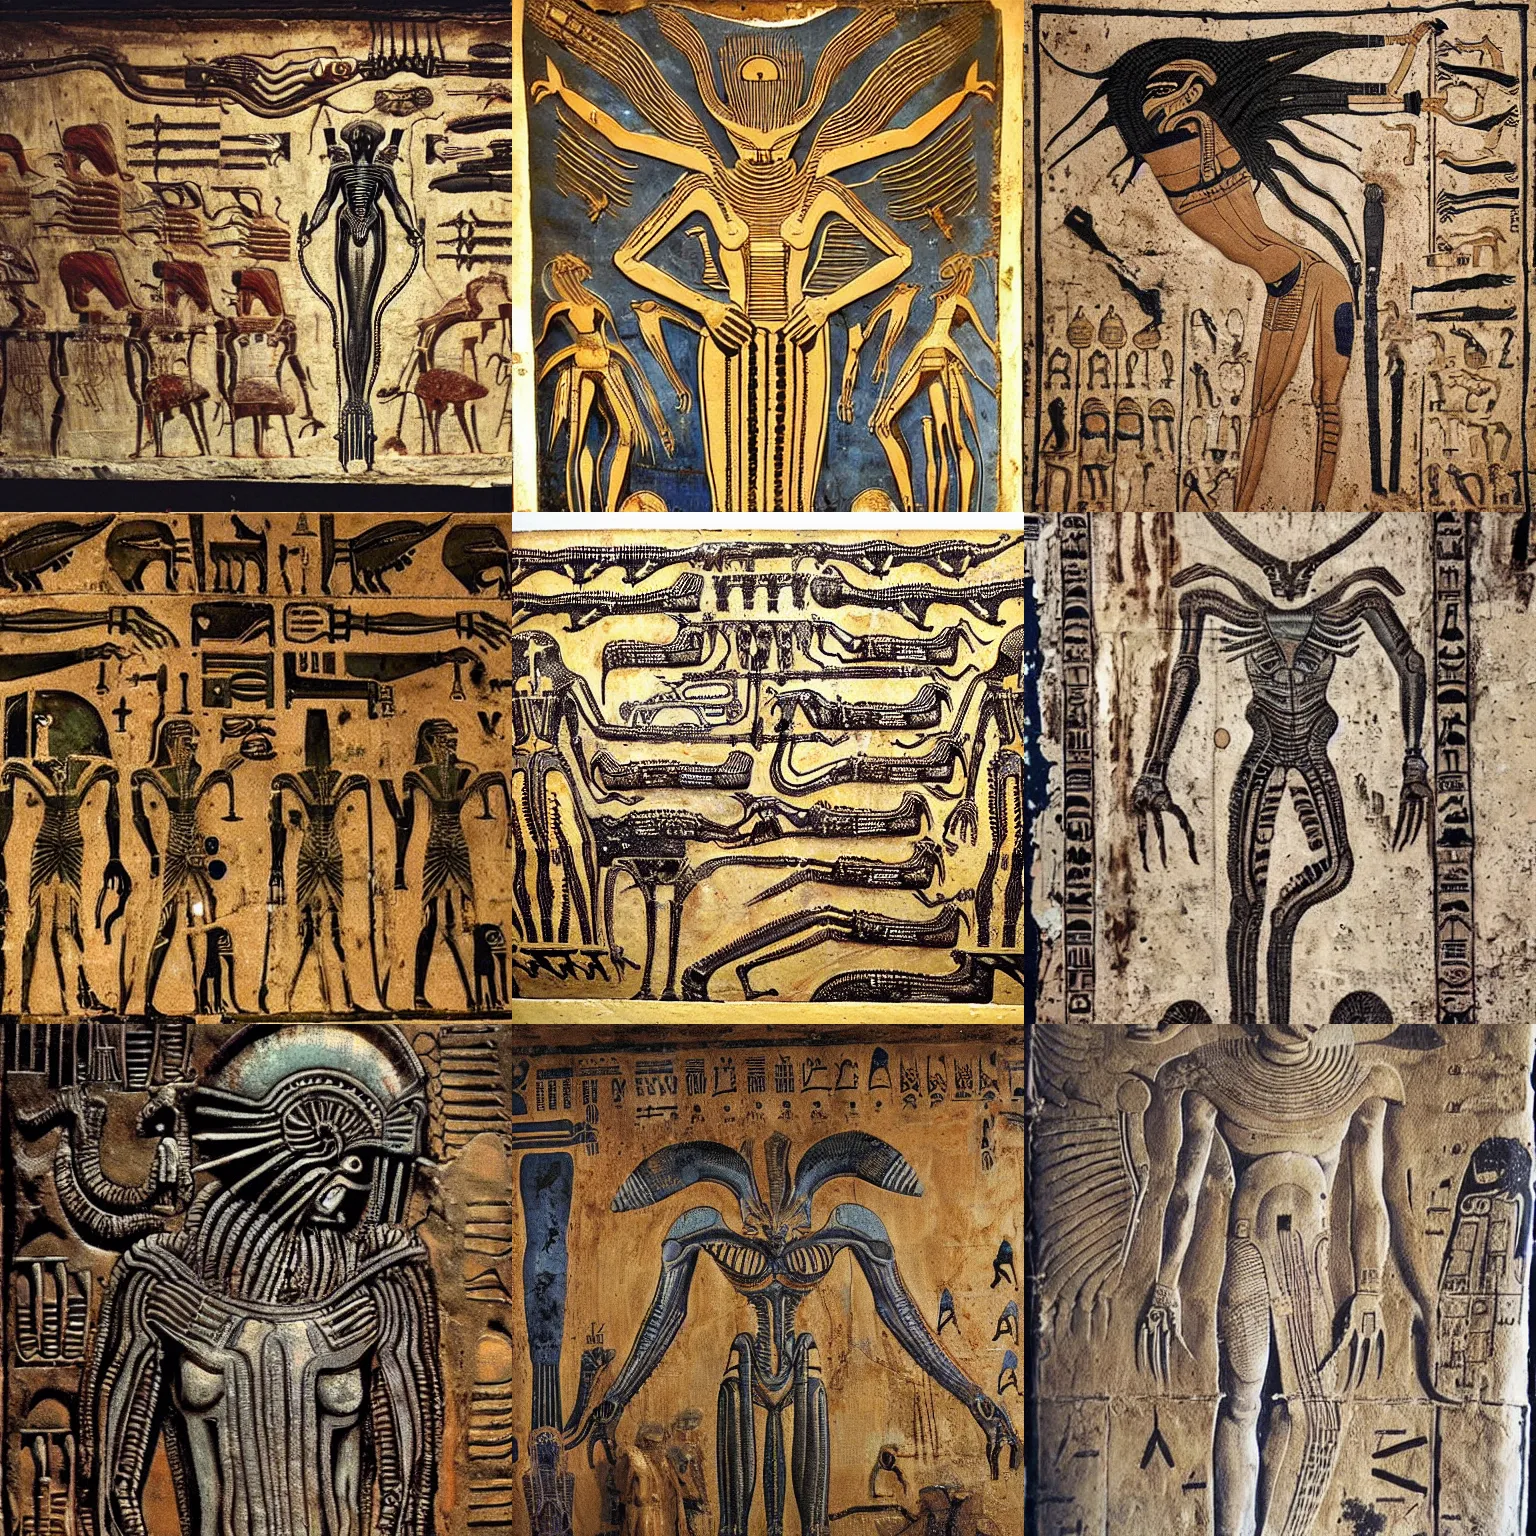 Prompt: [ xenomorph ] [ giger ] [ alien ] from movie aliens painted on highly intricate ancient egyptian mural art, with many hieroglyphs